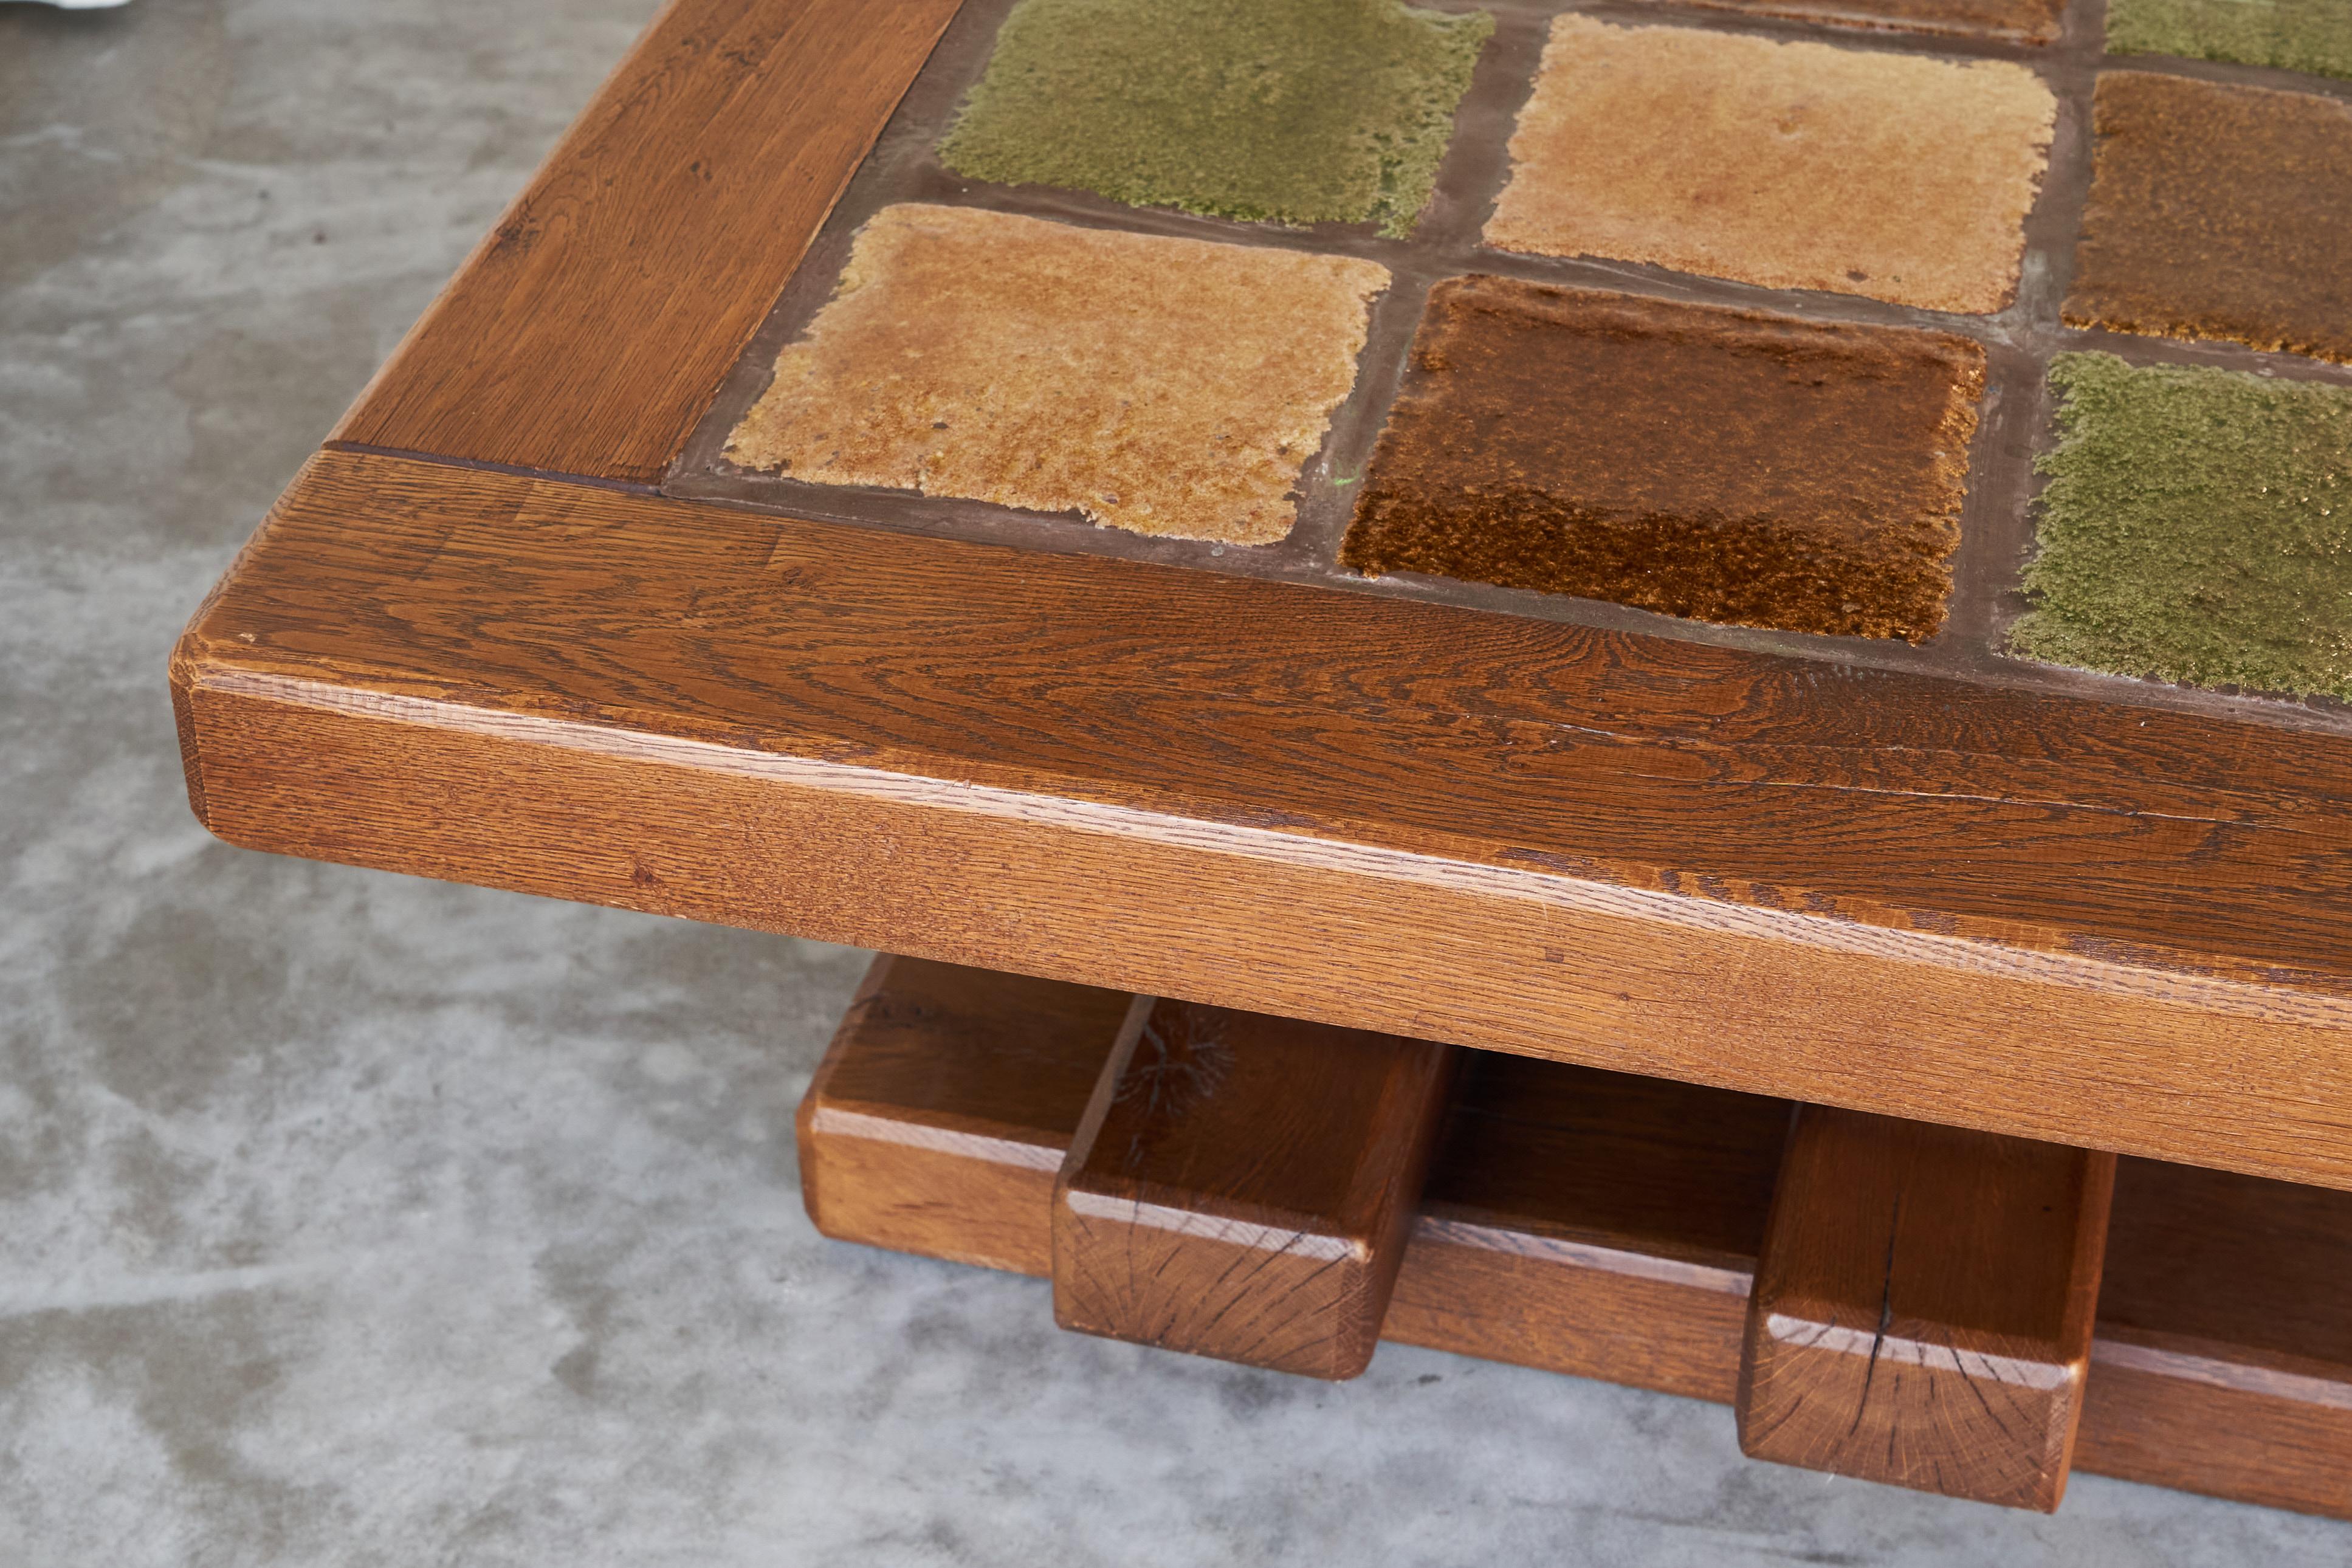 Constructivist Coffee Table in Solid Oak and Ceramic 1960s For Sale 2